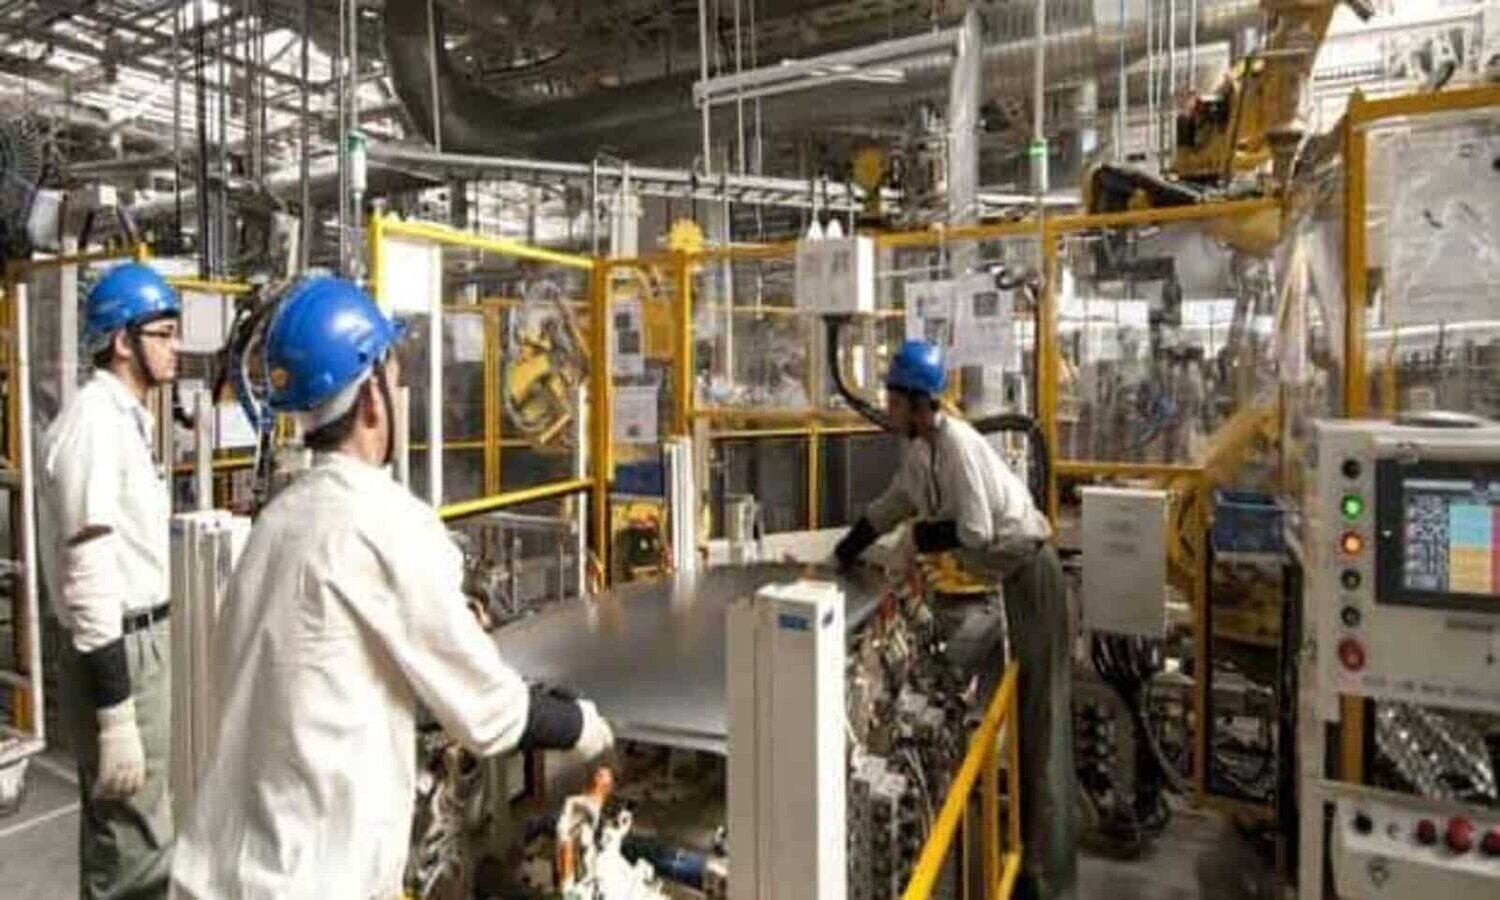 Indian Economy: Decline in the growth of all industrial sectors of the country, claims a report by Morgan Stanley